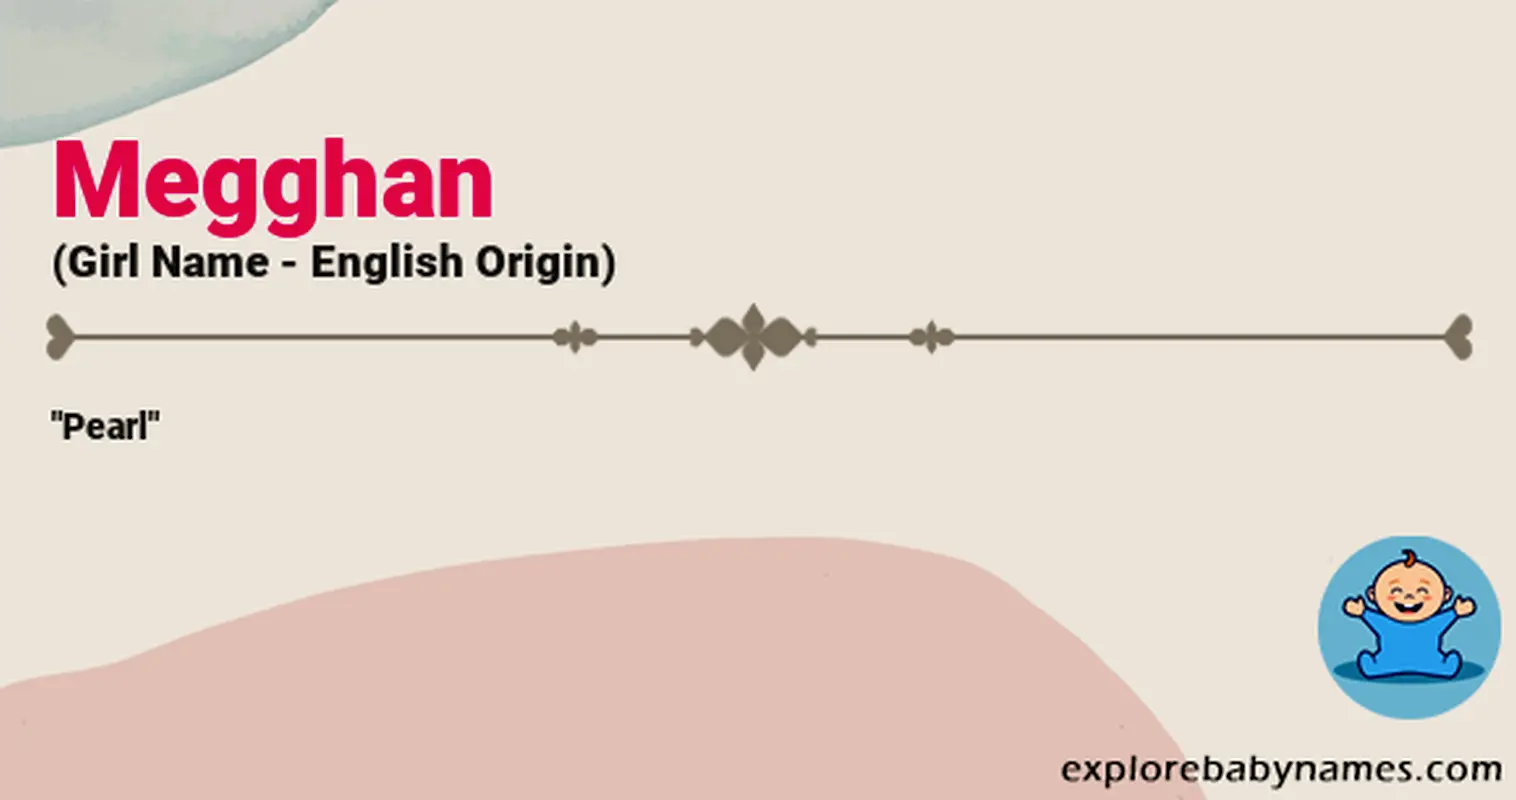 Meaning of Megghan